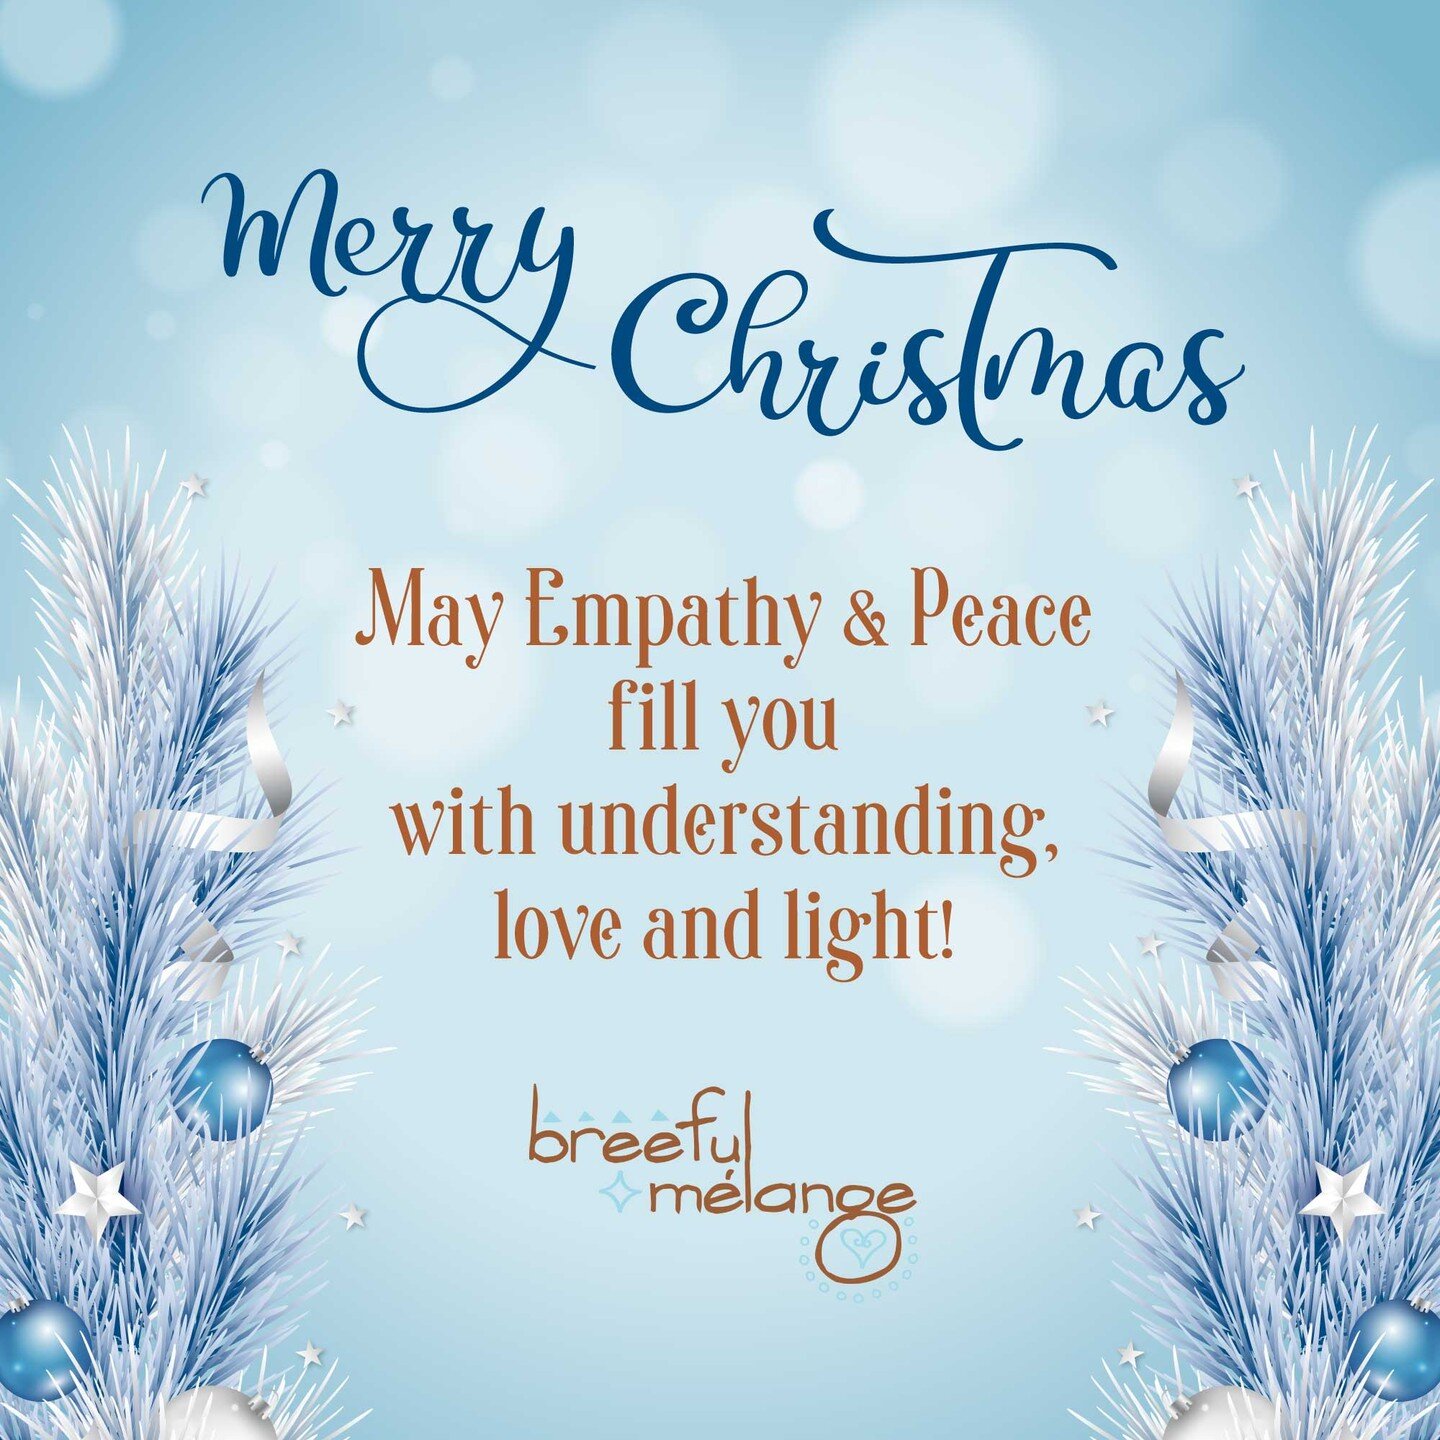 Merry Christmas!!! May Empathy &amp; Peace fill you with understanding, love and light!

#MerryChristmas #Christmas2023 #HappyHolidays